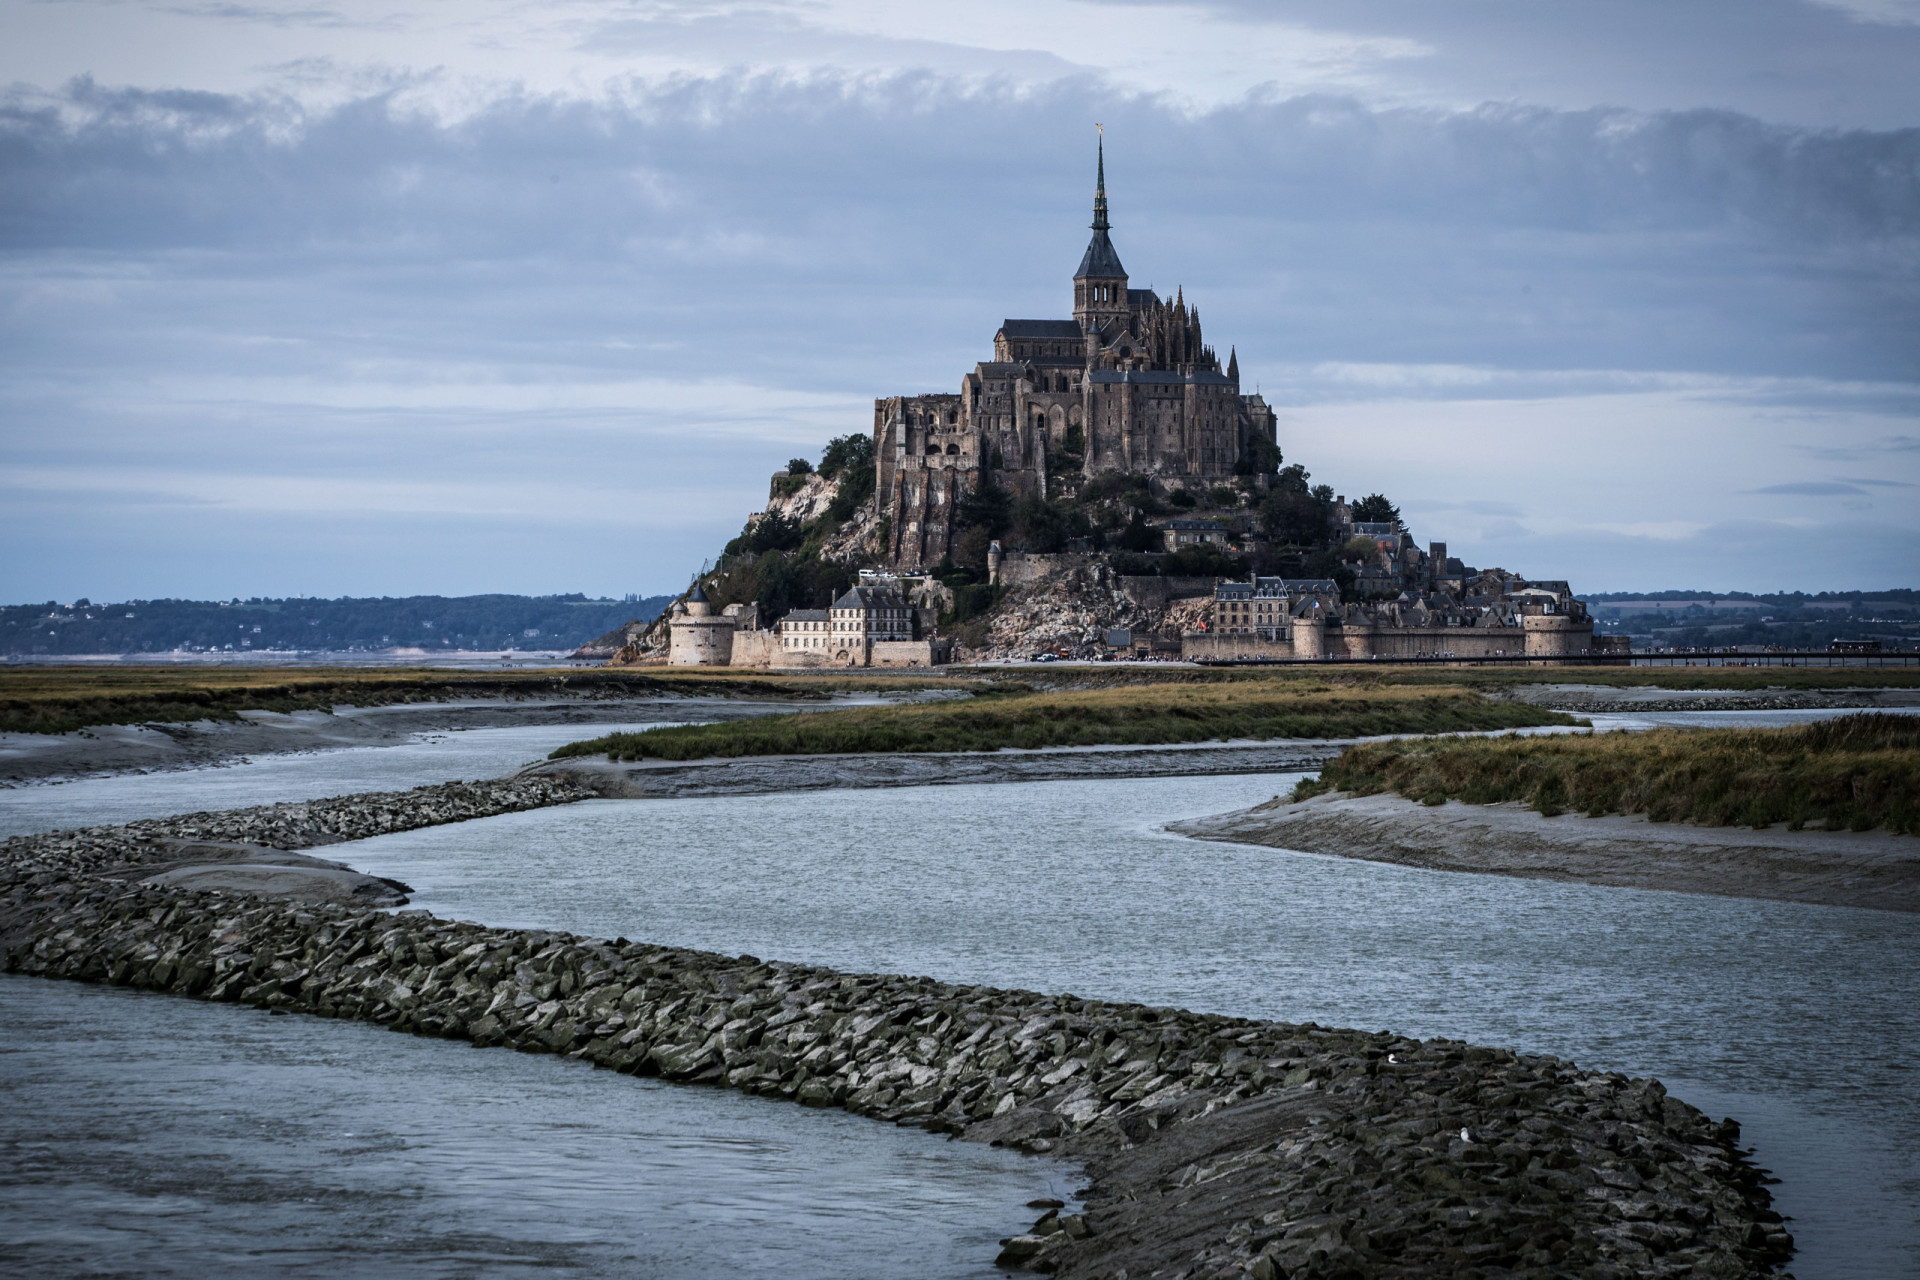 <p>For almost 1,000 years, Mont Saint-Michel has become one of the most popular places of pilgrimage in Western Europe. Located off the coast of Normandy, people go there to ask for eternal life from the Archangel of Judgement, Saint Michael.</p><p><a href="https://www.msn.com/en-us/community/channel/vid-7xx8mnucu55yw63we9va2gwr7uihbxwc68fxqp25x6tg4ftibpra?cvid=94631541bc0f4f89bfd59158d696ad7e">Follow us and access great exclusive content every day</a></p>